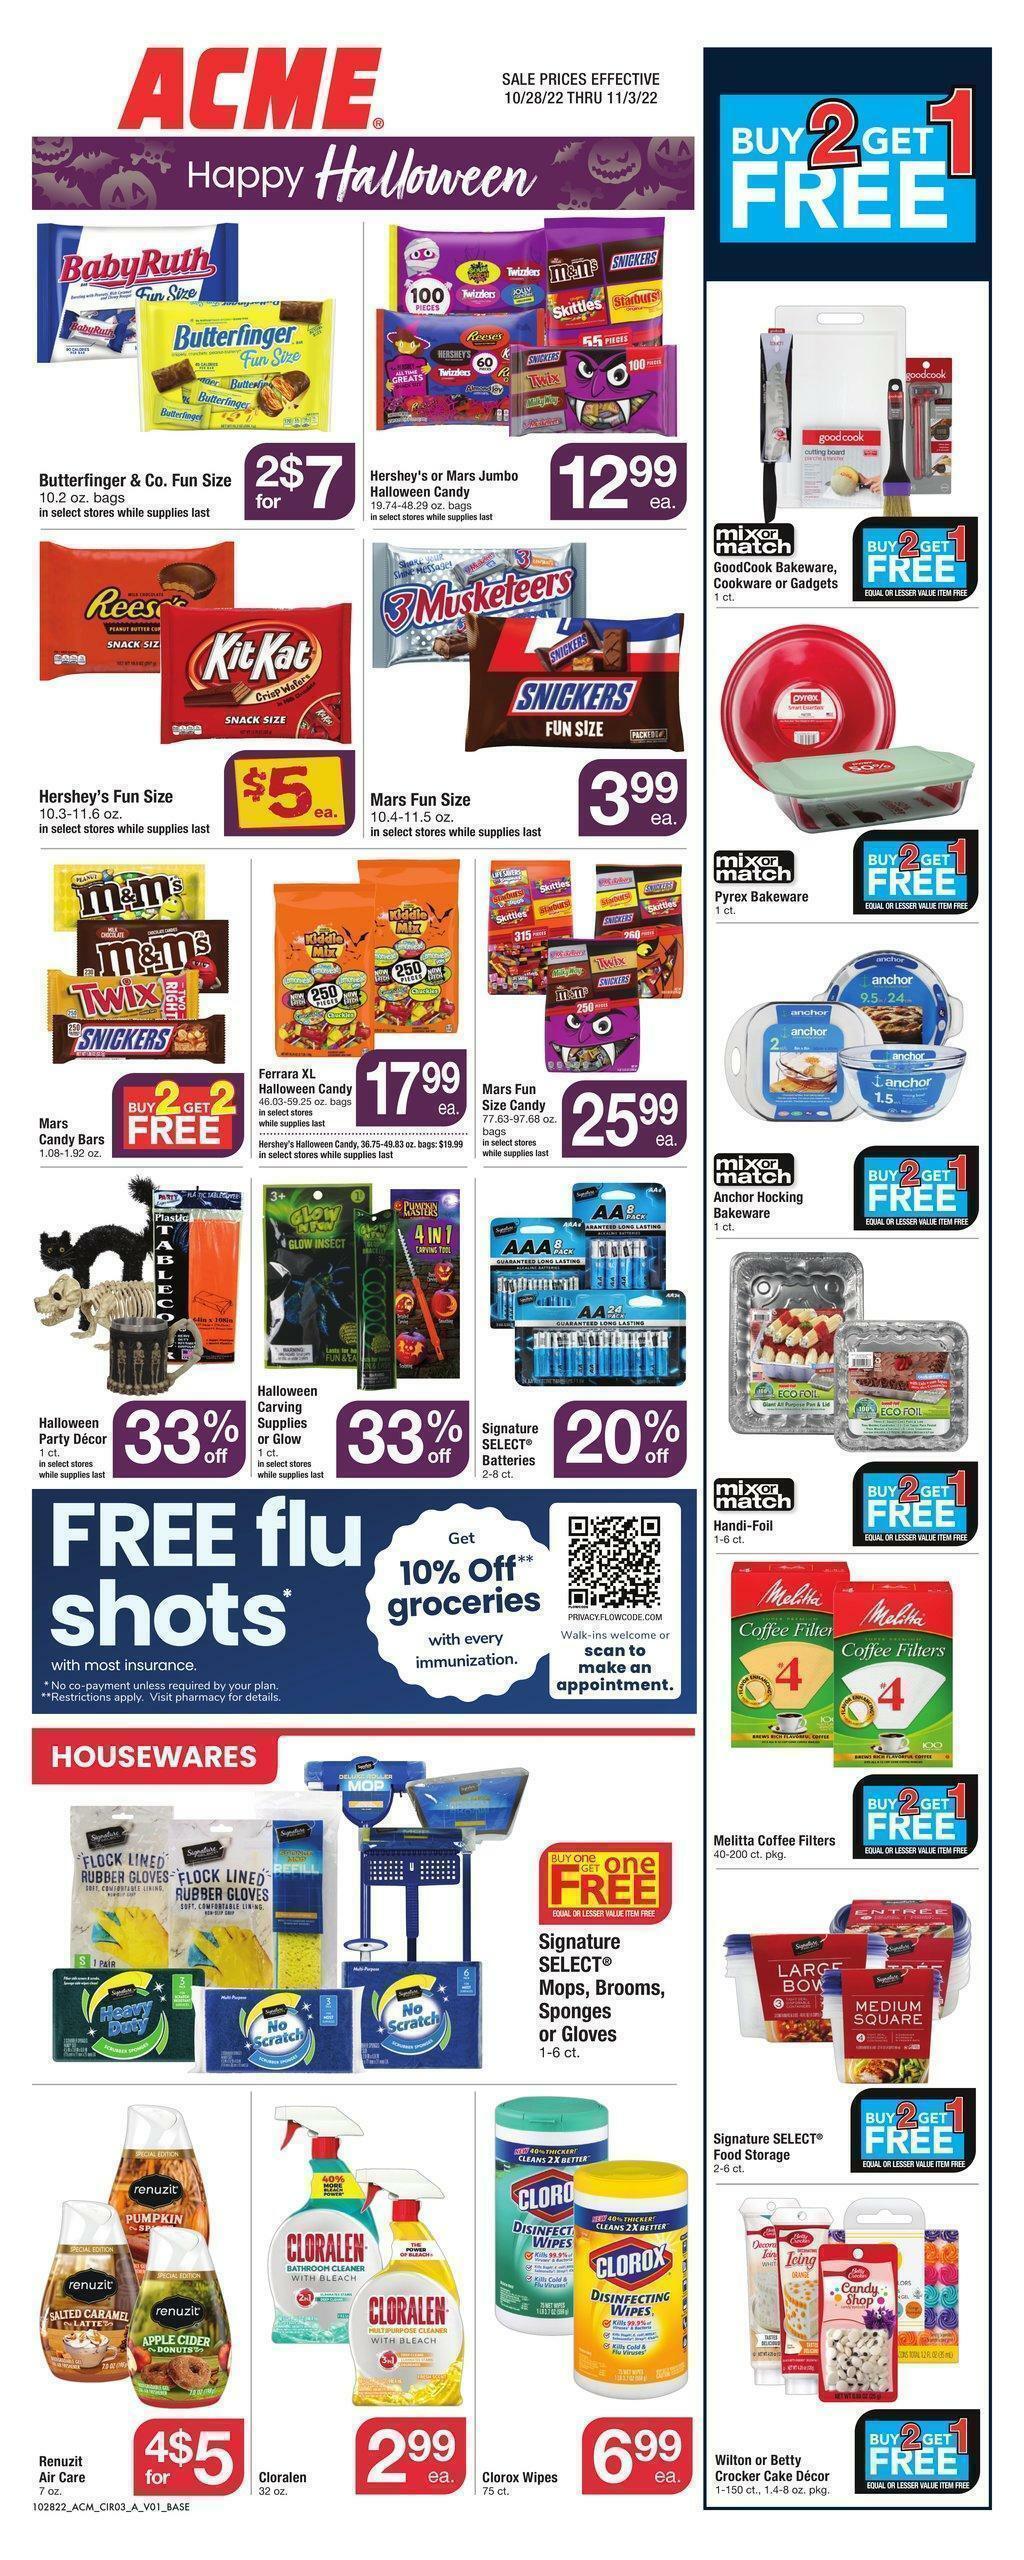 ACME Markets Weekly Ad from October 28